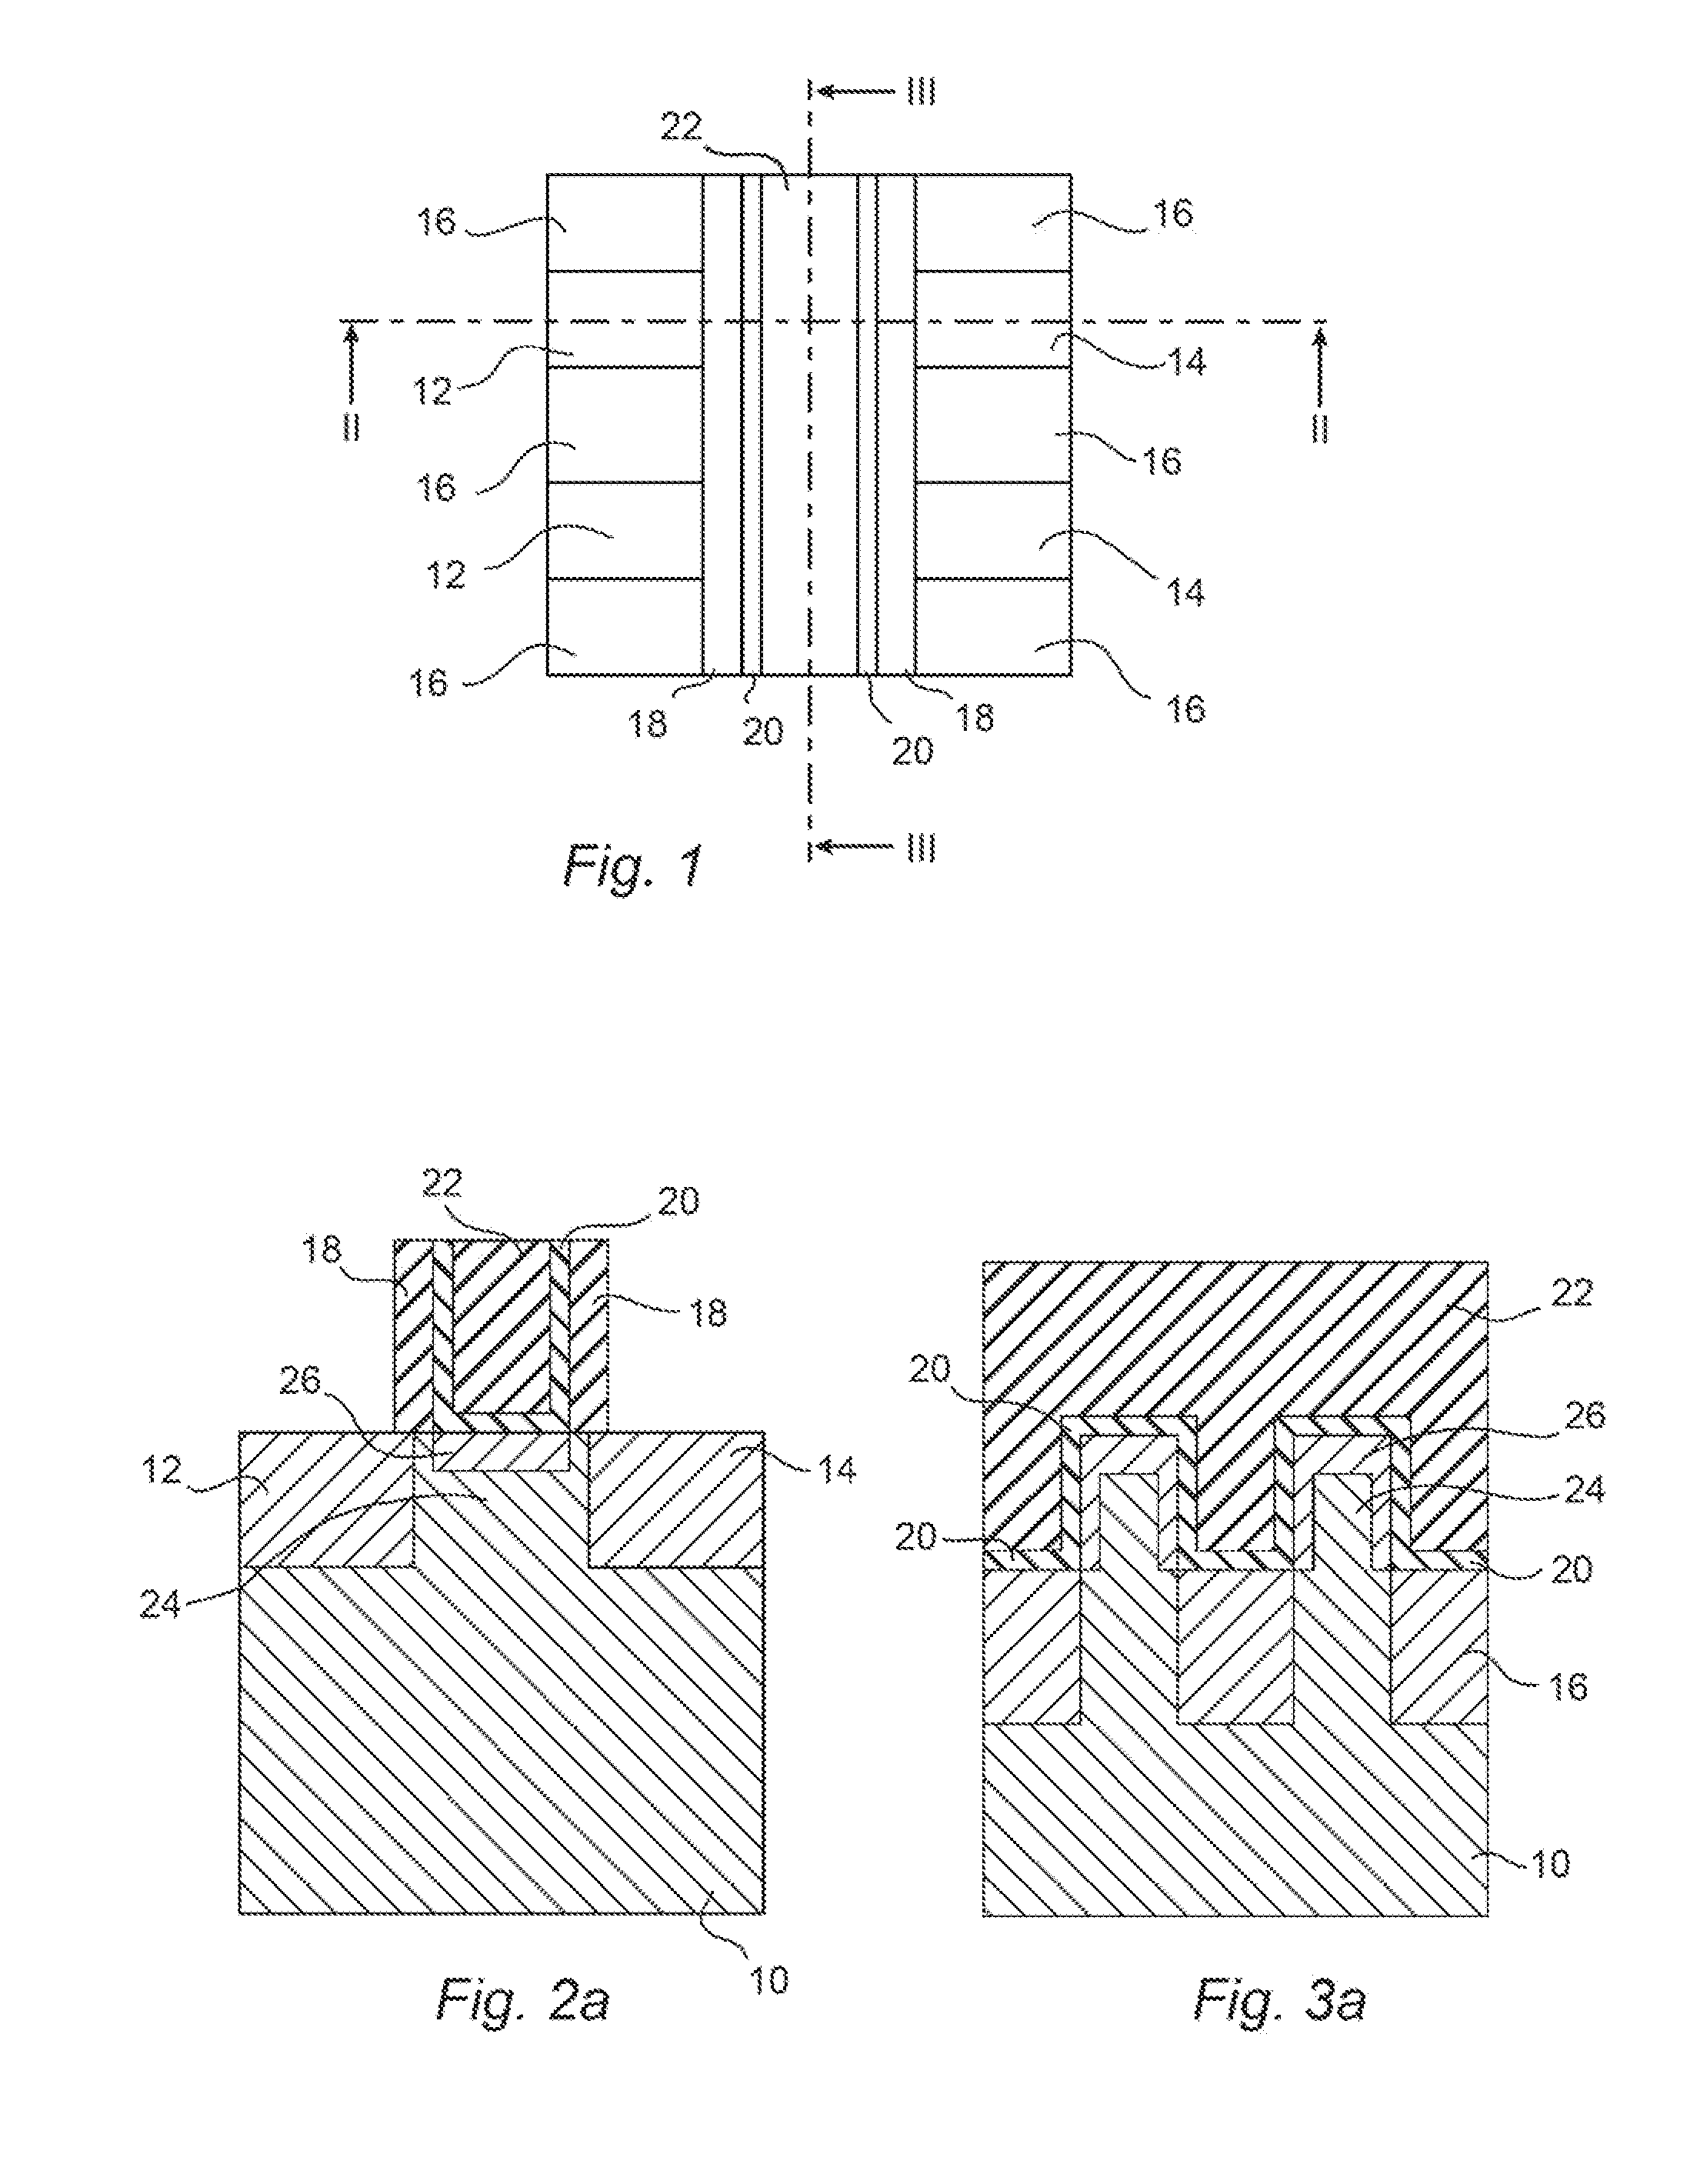 Semiconductor device having compressively strained channel region and method of making same